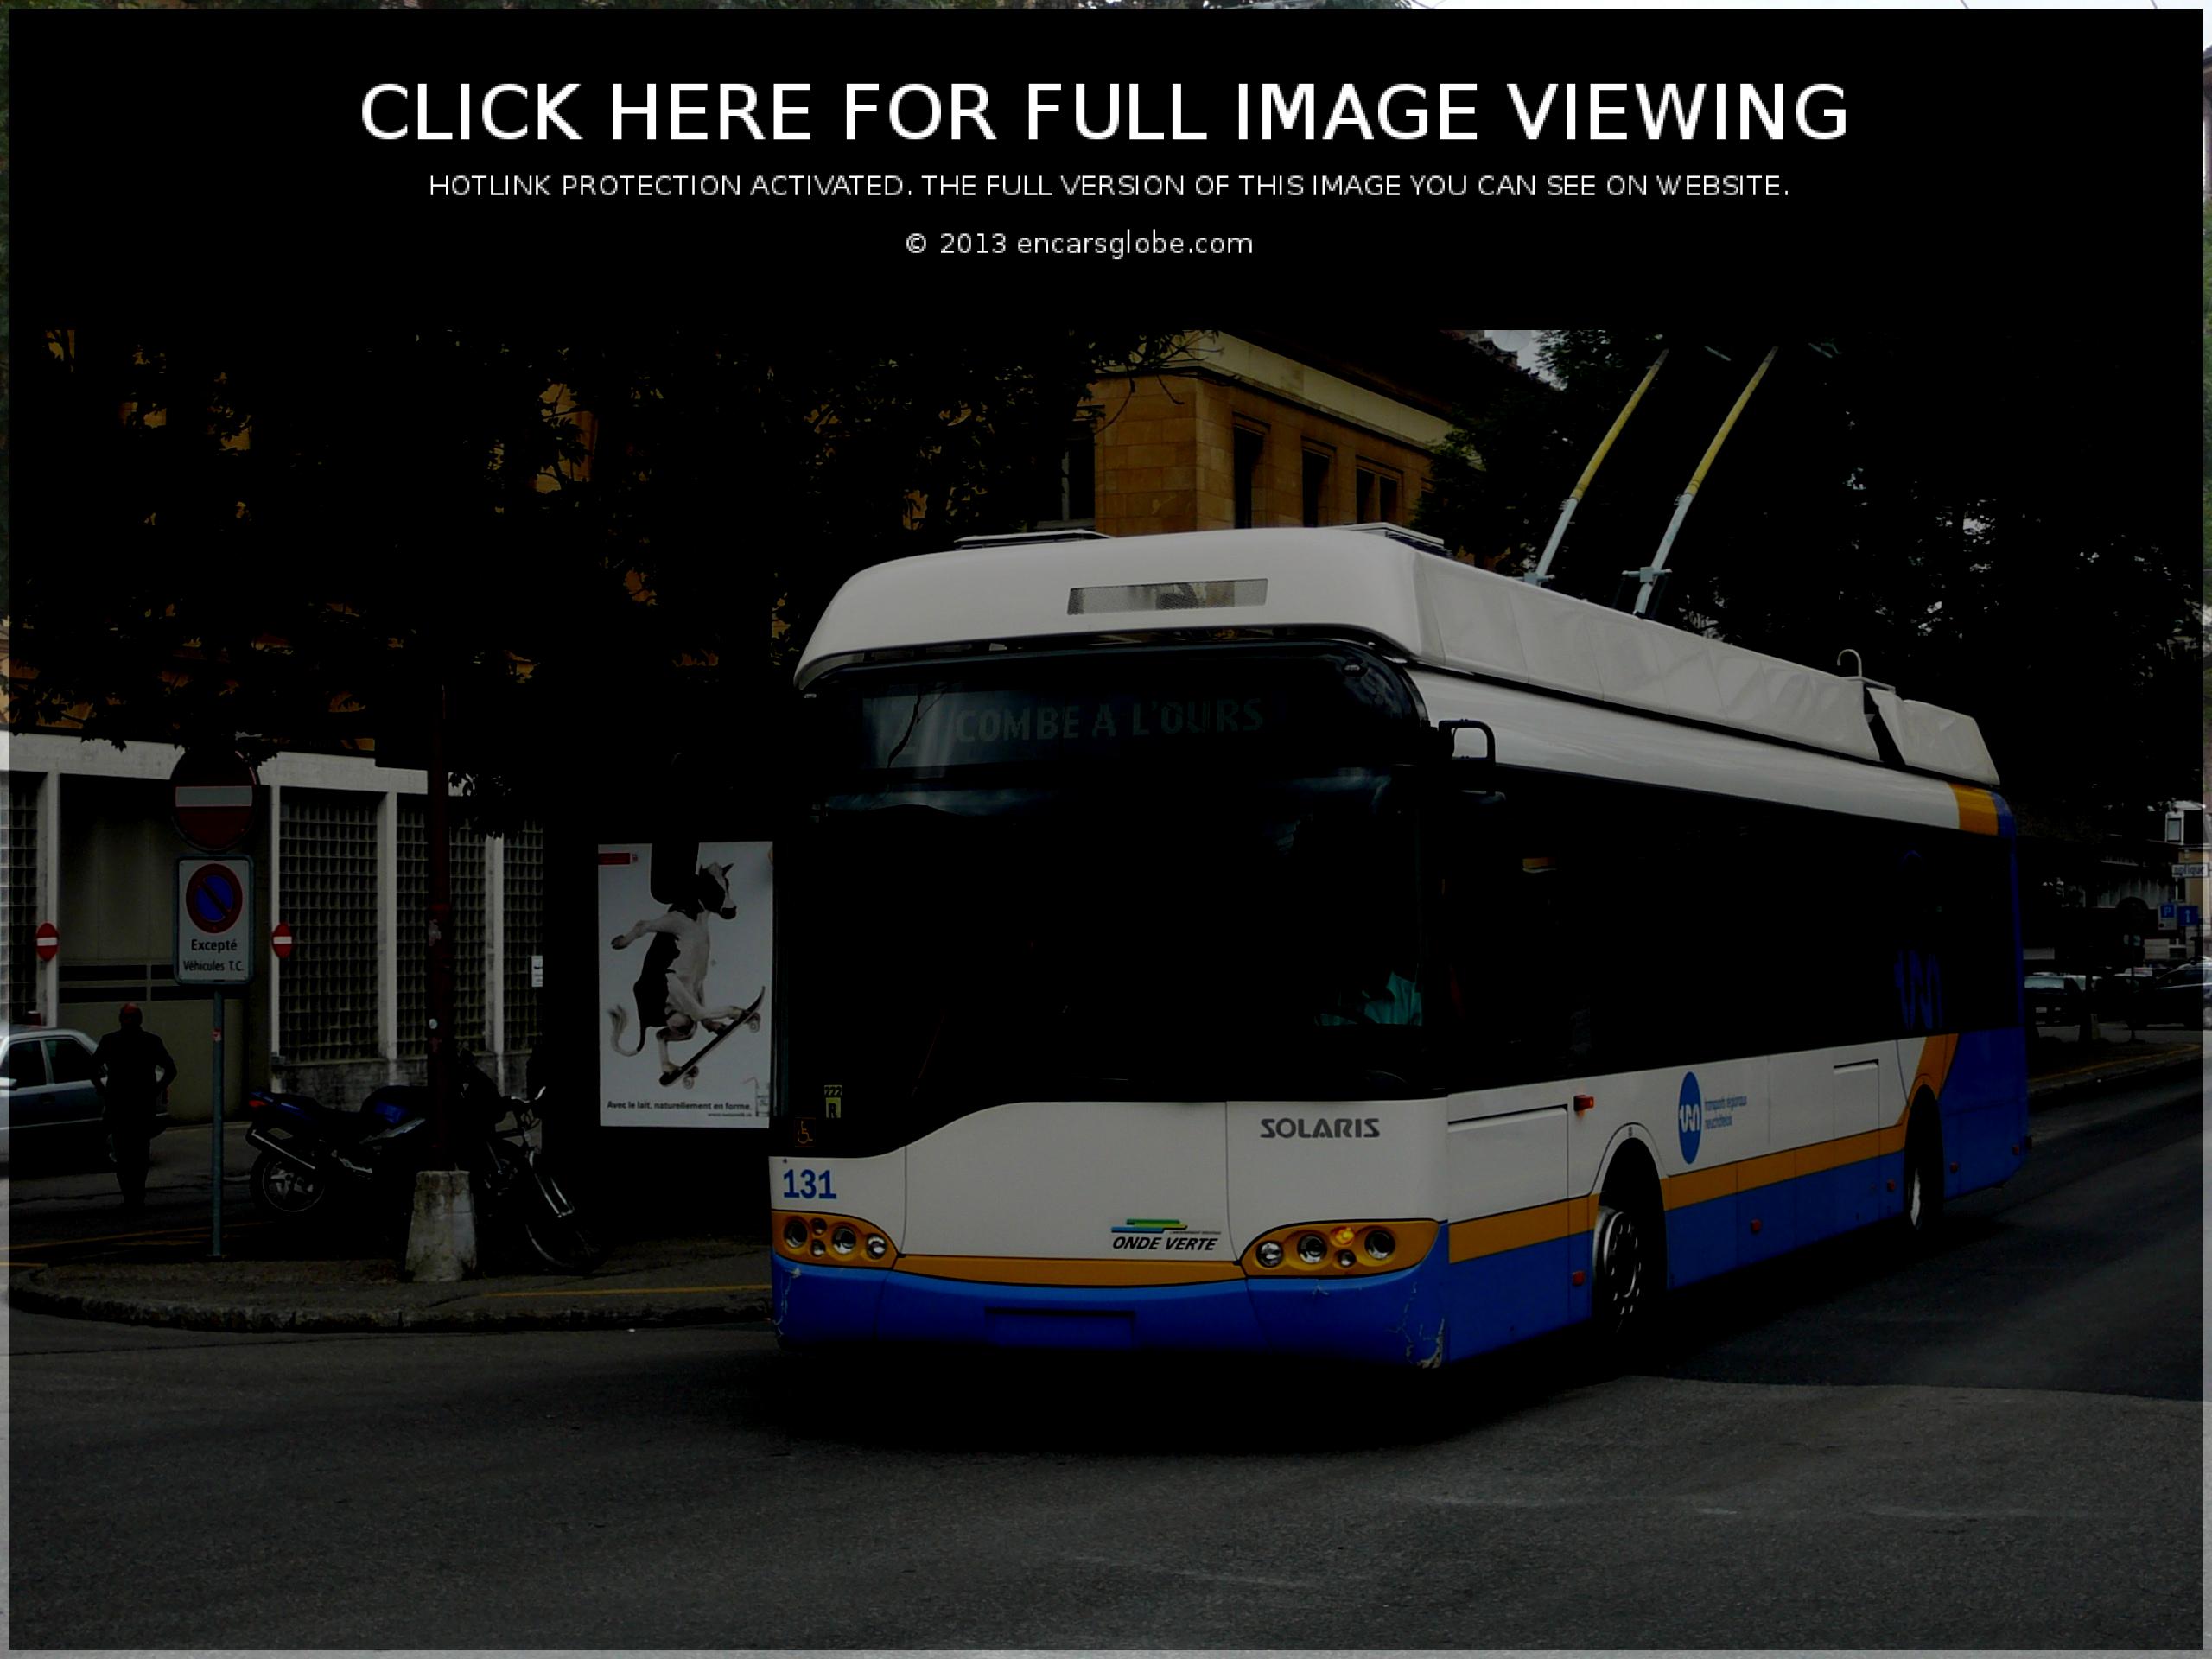 Solaris Trolley-bus: Photo gallery, complete information about ...